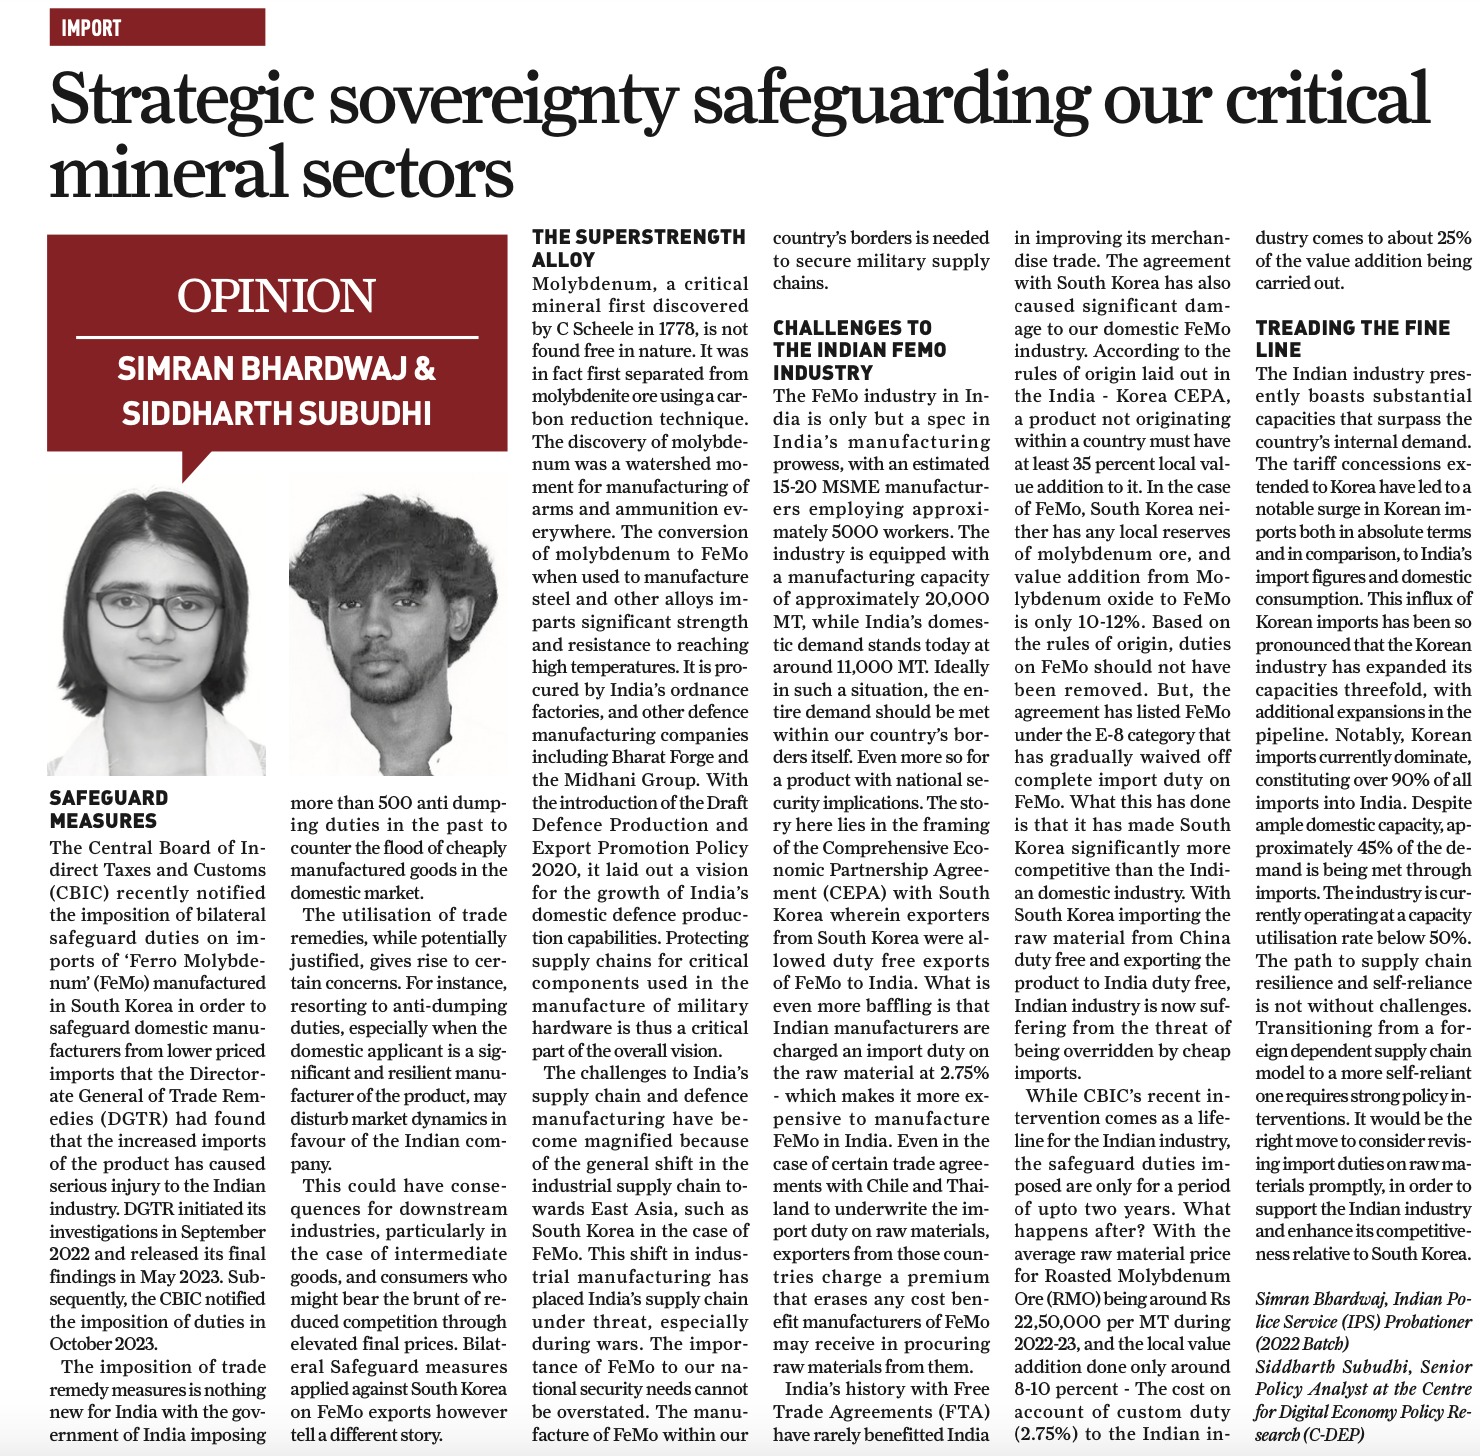 Strategic Sovereignty : Safeguarding our critical mineral sectors